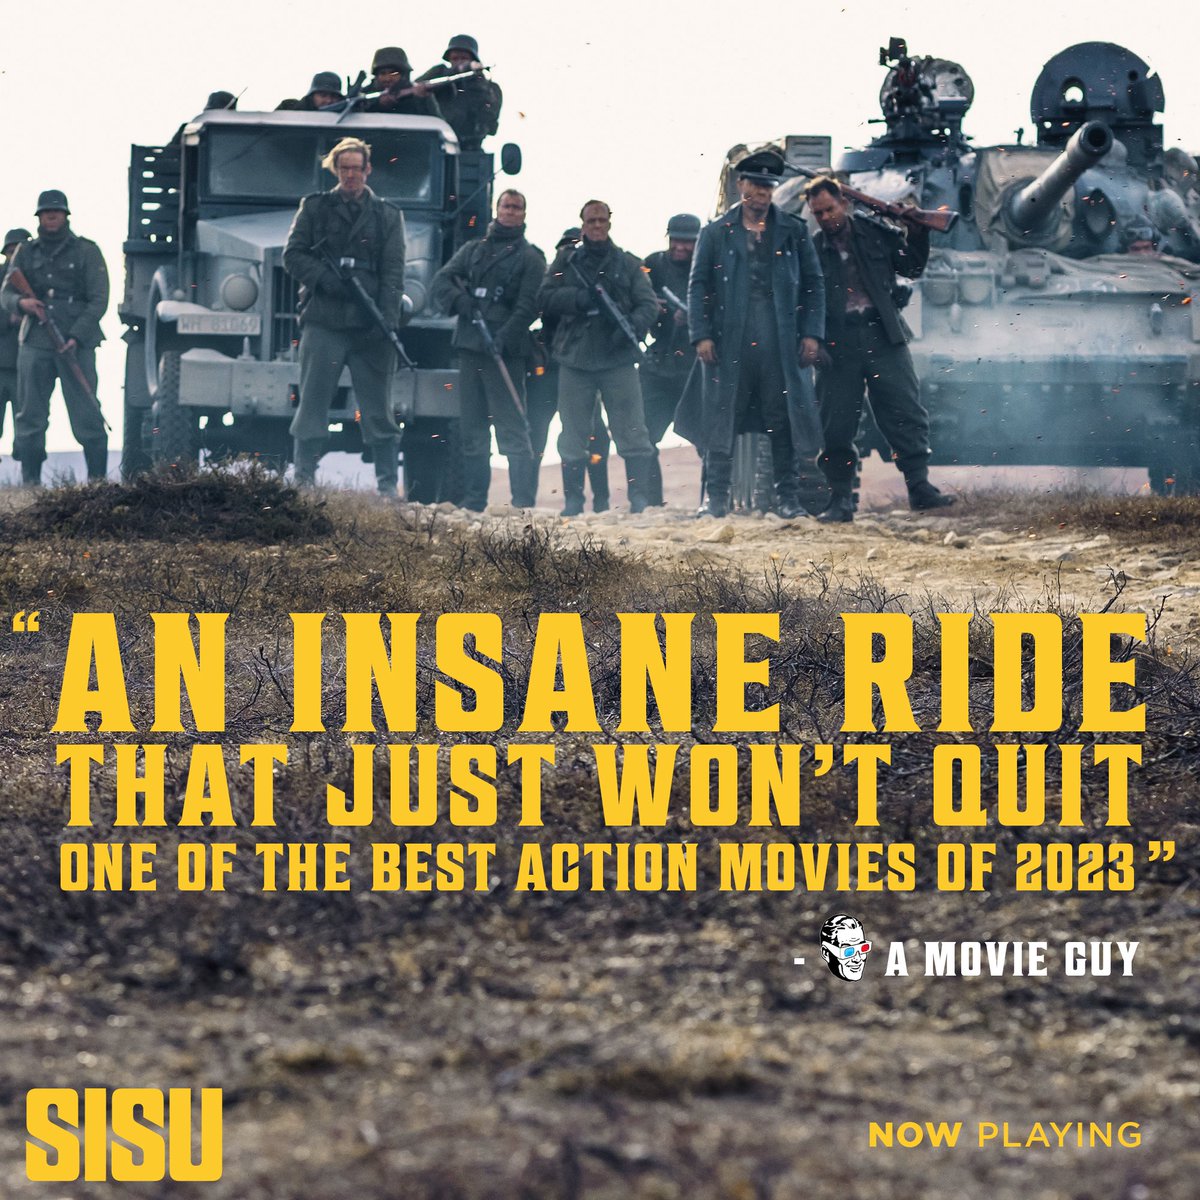 This movie is wicked! @SISUmovie I must say, it’s worth the watch. Non stop awesome action!
Also my brothers tag is SISU so it’s a pretty good coincidence. 
#SISU #Nonstop